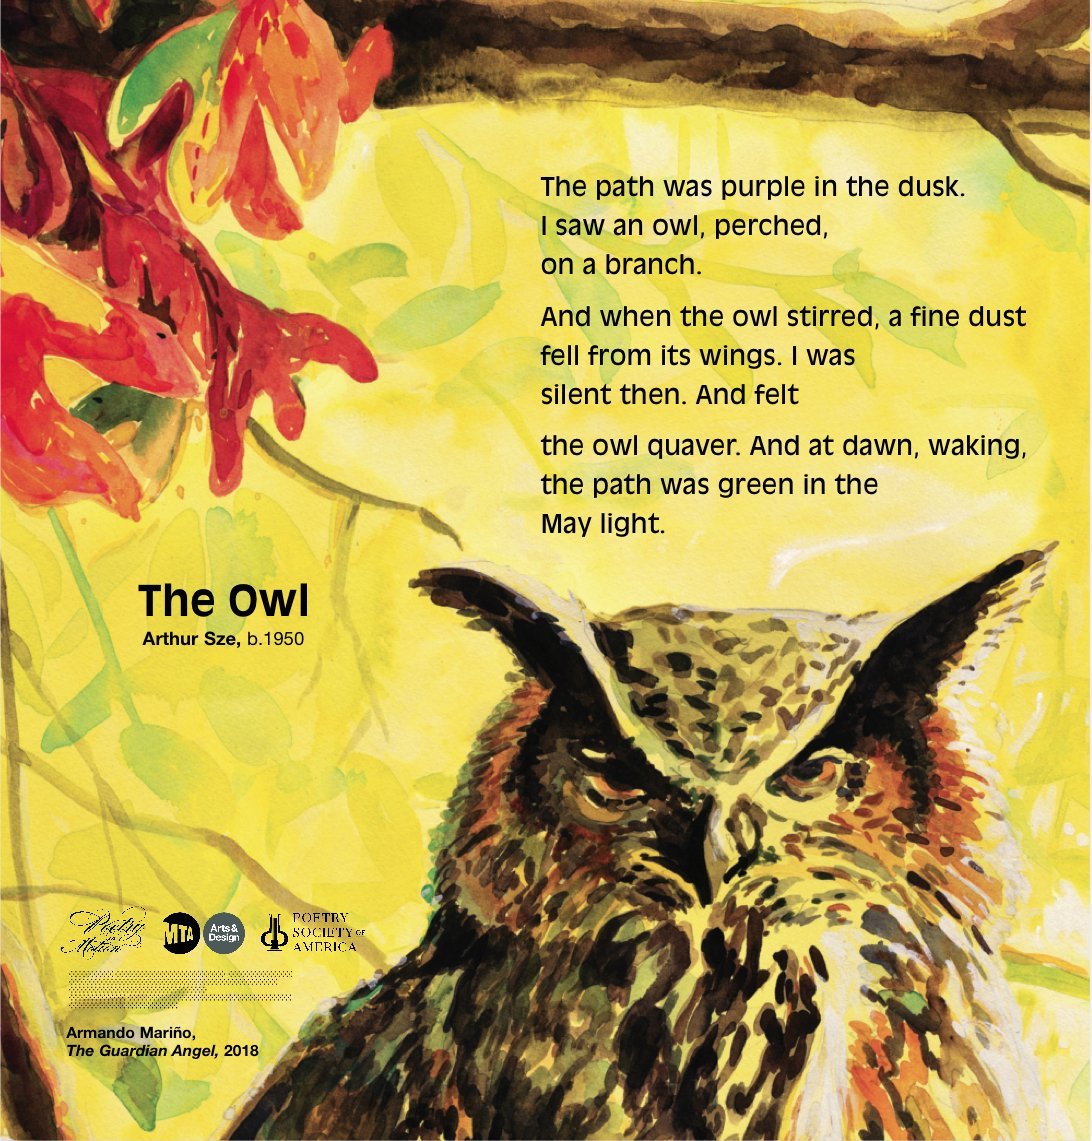 A poster featuring art by Armando Mariño depicts a forward-facing owl against a bright yellow background and red flowers. Above the owl is a poem written in black text titled The Owl, by Arthur Sze.